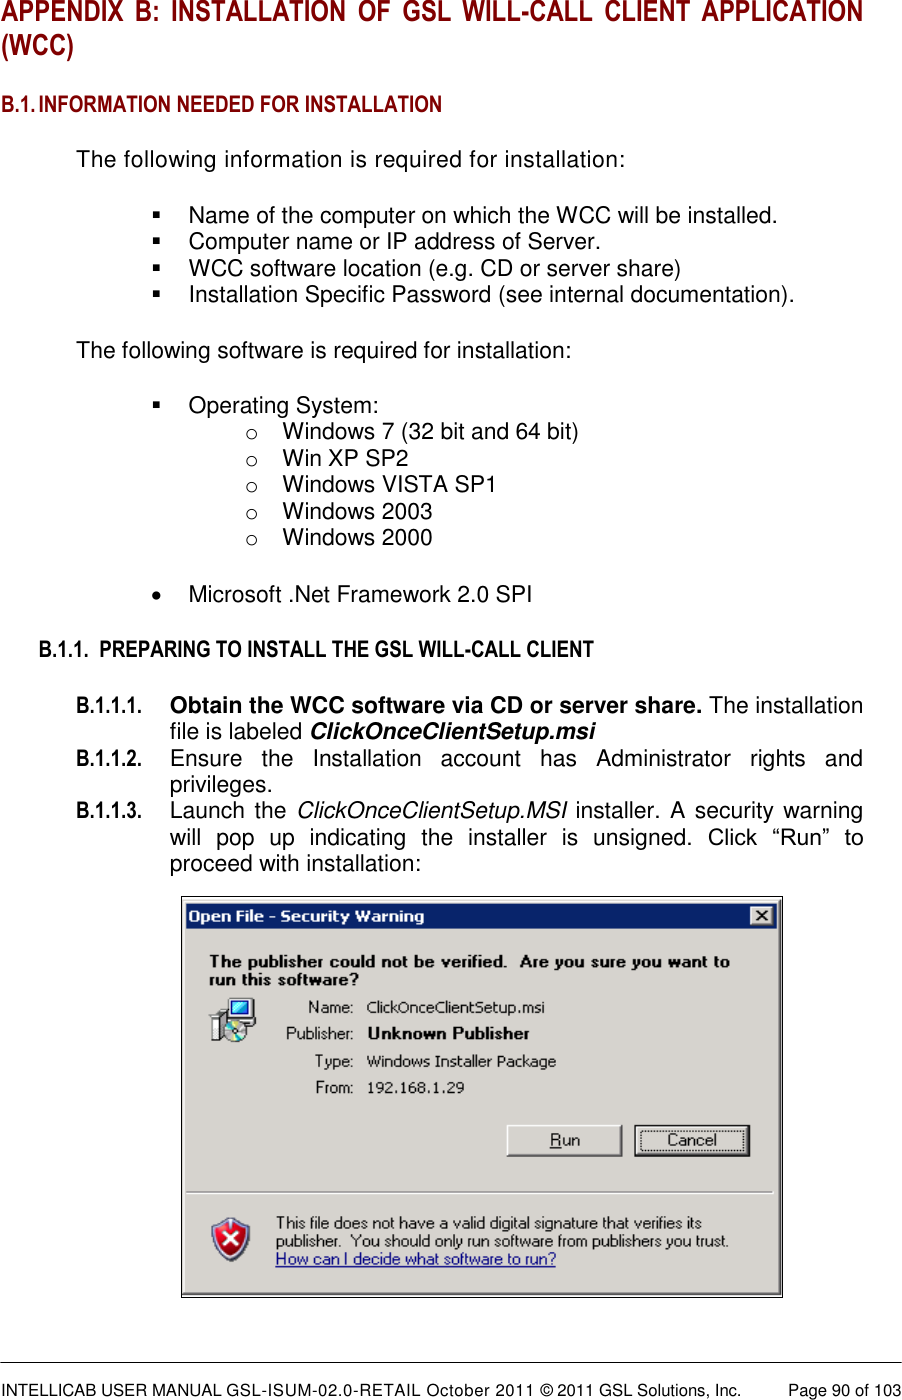  INTELLICAB USER MANUAL GSL-ISUM-02.0-RETAIL October 2011 © 2011 GSL Solutions, Inc.   Page 90 of 103   APPENDIX  B:  INSTALLATION  OF  GSL  WILL-CALL  CLIENT  APPLICATION (WCC) B.1. INFORMATION NEEDED FOR INSTALLATION The following information is required for installation:   Name of the computer on which the WCC will be installed.   Computer name or IP address of Server.   WCC software location (e.g. CD or server share)   Installation Specific Password (see internal documentation). The following software is required for installation:   Operating System:  o  Windows 7 (32 bit and 64 bit) o  Win XP SP2 o  Windows VISTA SP1 o  Windows 2003 o  Windows 2000   Microsoft .Net Framework 2.0 SPI B.1.1.  PREPARING TO INSTALL THE GSL WILL-CALL CLIENT B.1.1.1. Obtain the WCC software via CD or server share. The installation file is labeled ClickOnceClientSetup.msi B.1.1.2.  Ensure  the  Installation  account  has  Administrator  rights  and privileges. B.1.1.3. Launch the  ClickOnceClientSetup.MSI installer. A security warning will  pop  up  indicating  the  installer  is  unsigned.  Click  “Run”  to proceed with installation:          